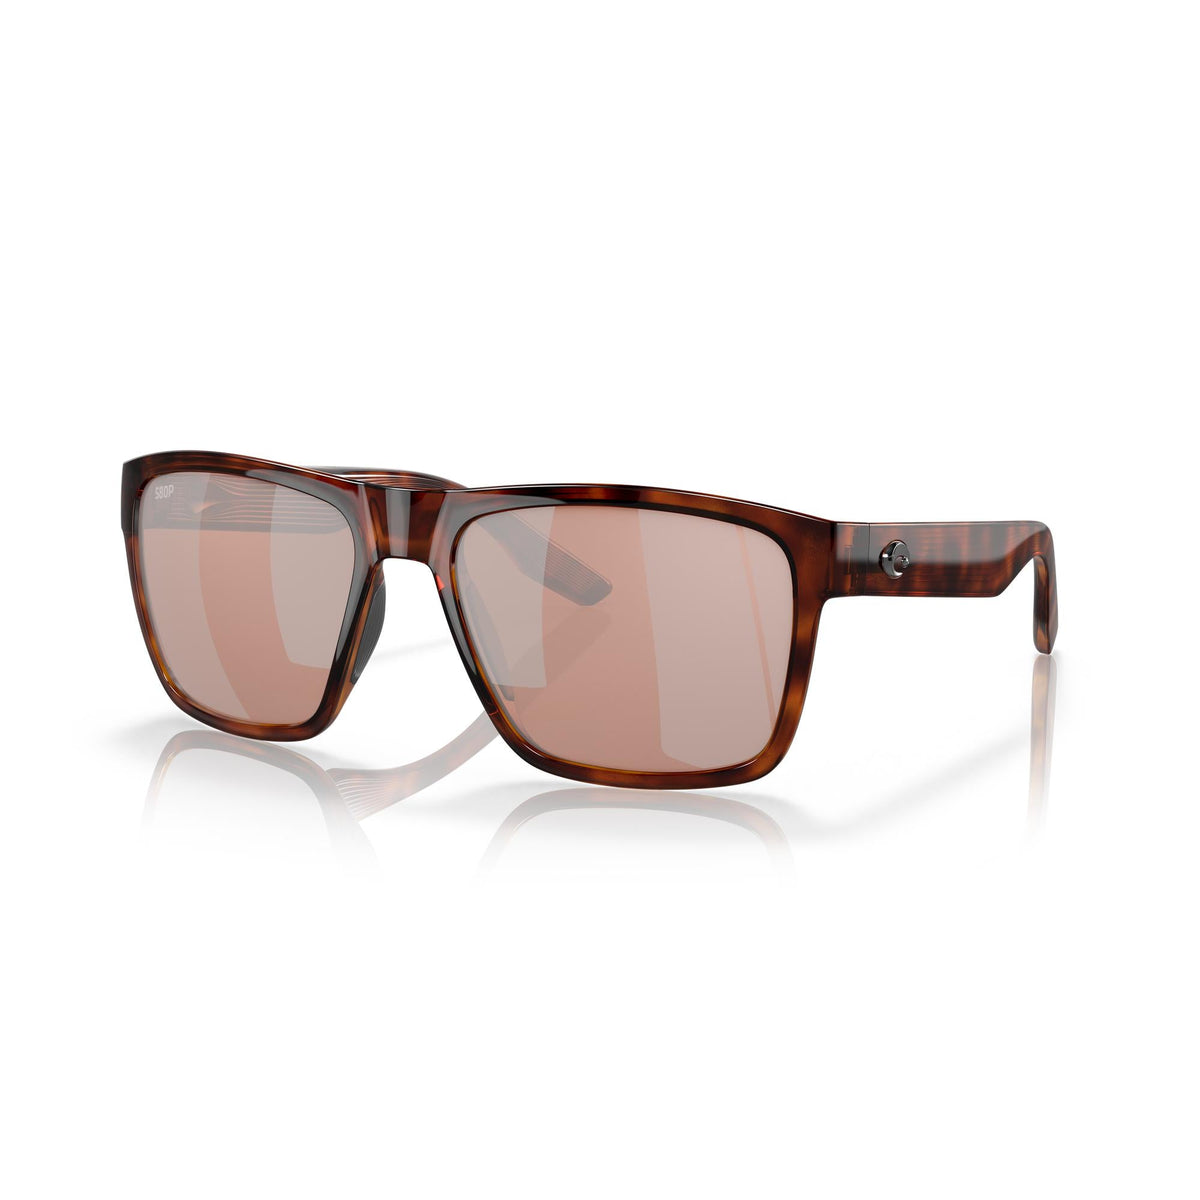 View of Sunglasses Costa Paunch XL Tortoise Copper Silver Mirror 580P available at EZOKO Pike and Musky Shop